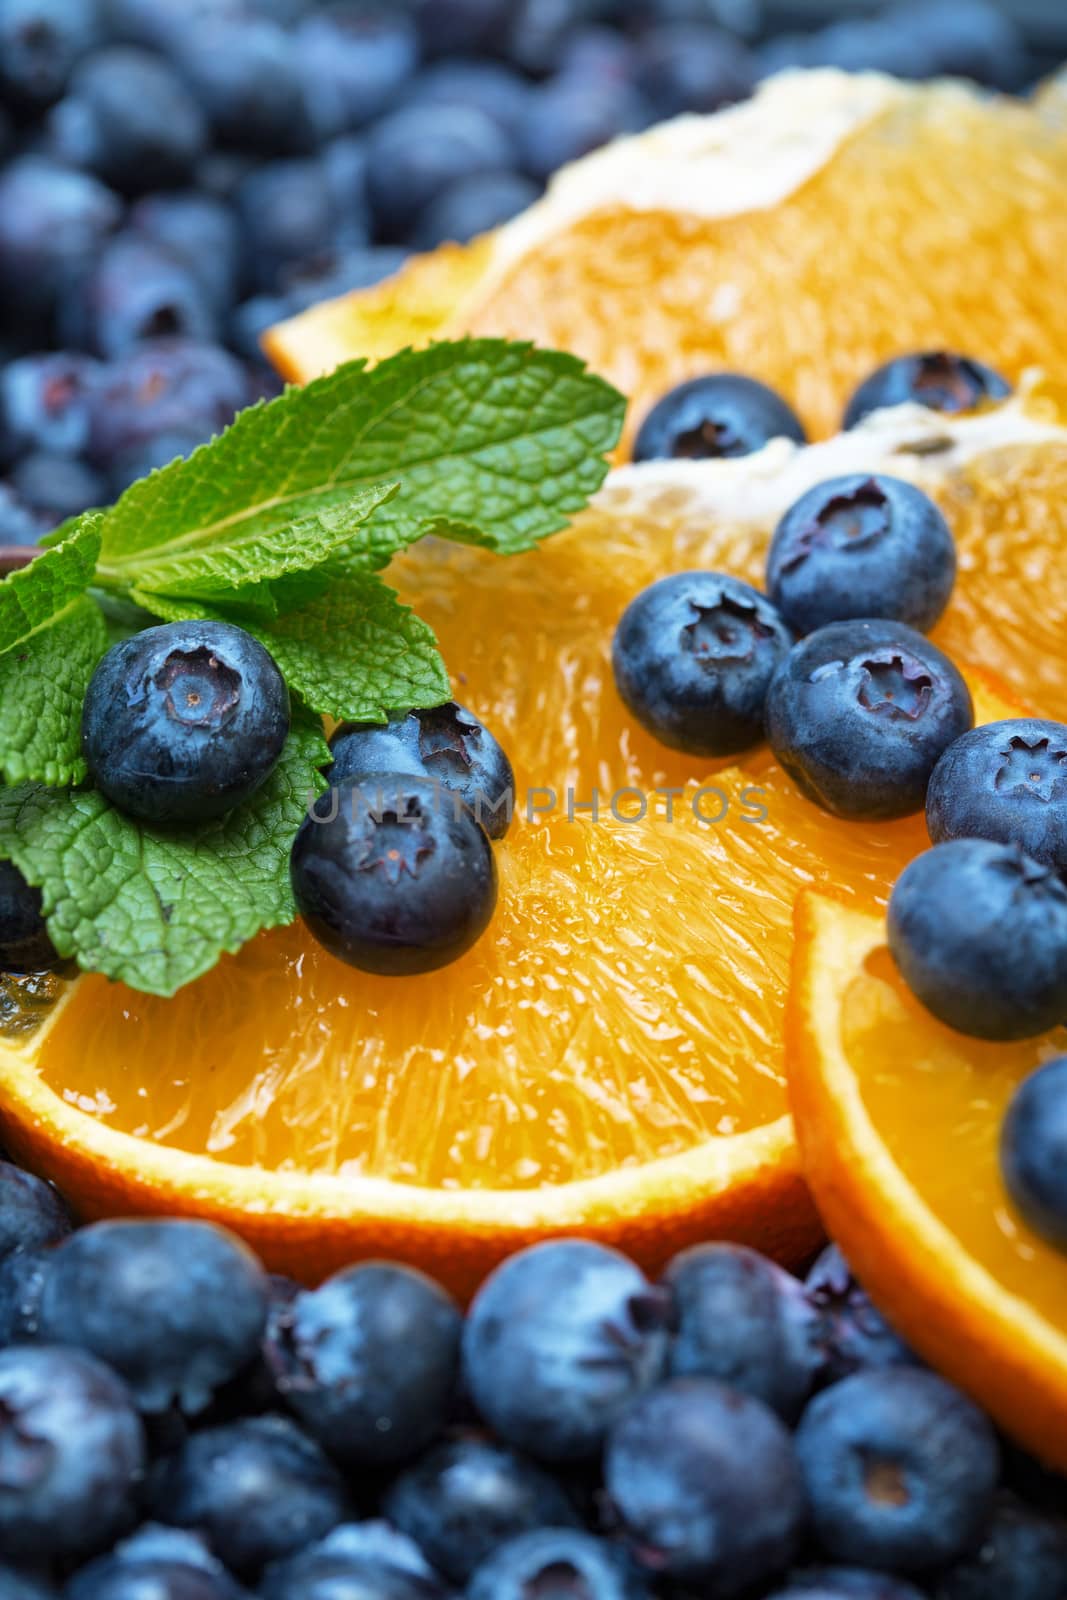 Freshly picked blueberries with orange by Discovod